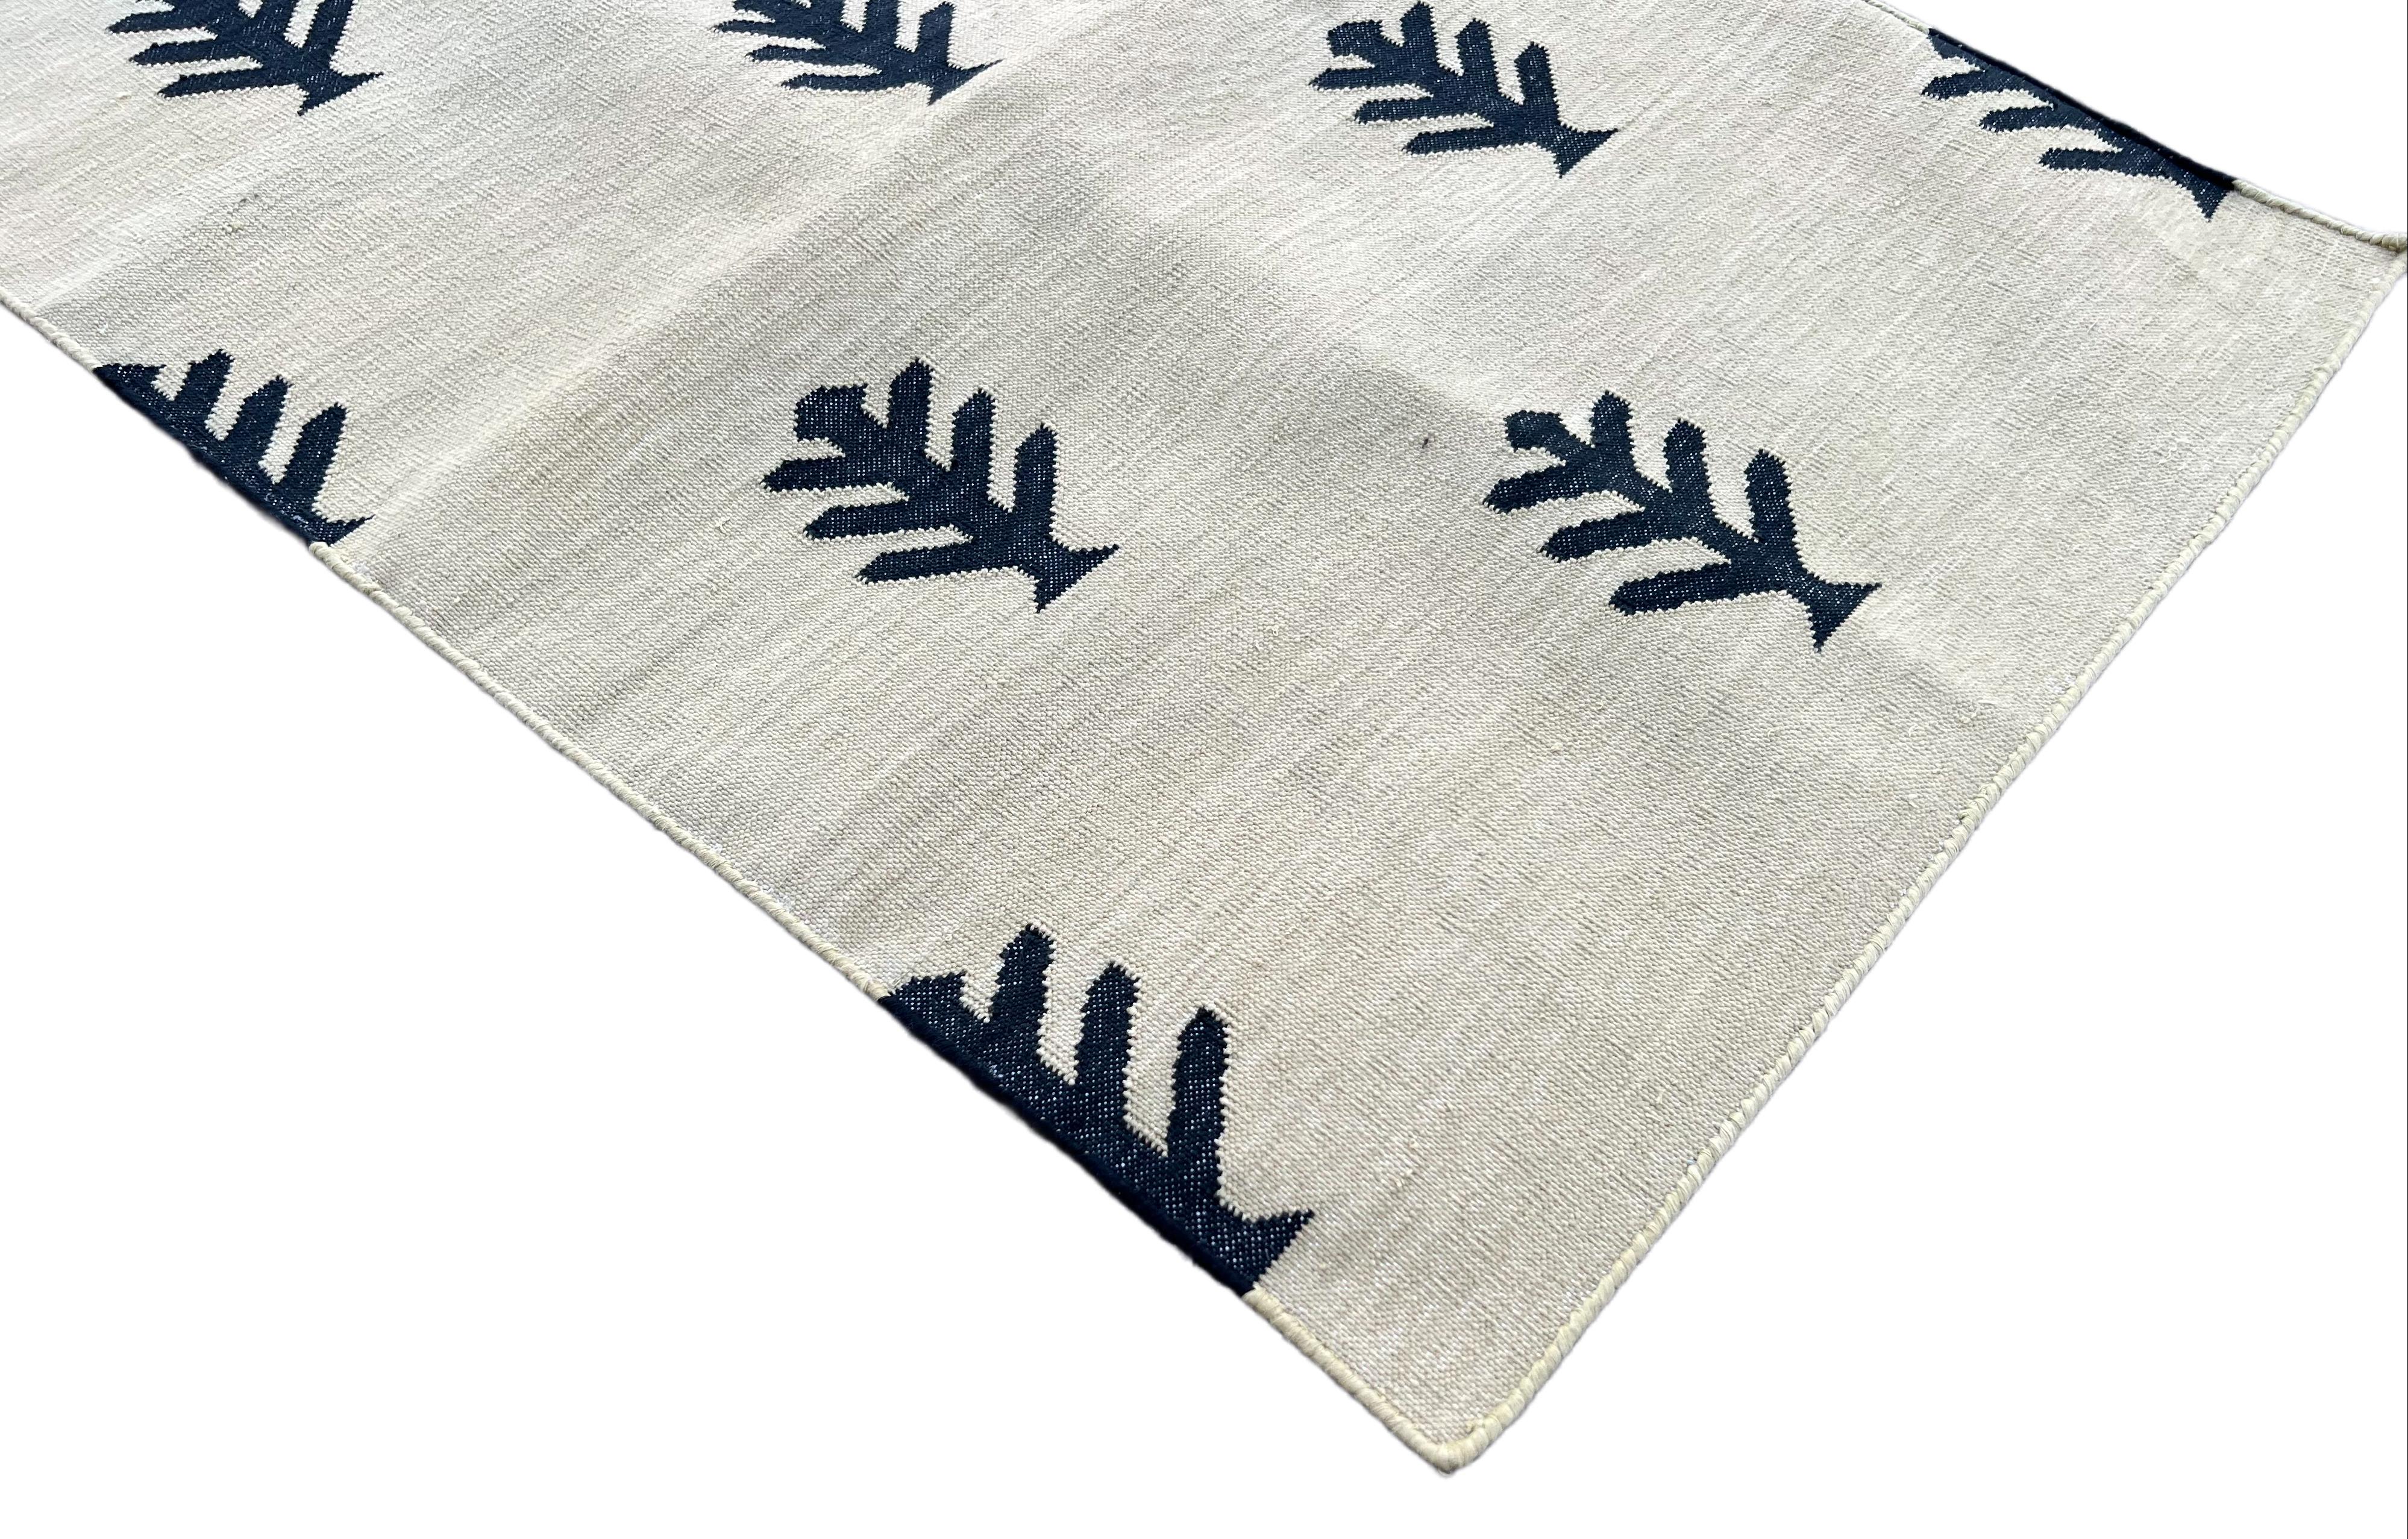 Cotton Natural Vegetable Dyed, Olive Green And Black Tree Patterned Indian Dhurrie Runner-2x6 feet (60x180cm)
These special flat-weave dhurries are hand-woven with 15 ply 100% cotton yarn. Due to the special manufacturing techniques used to create